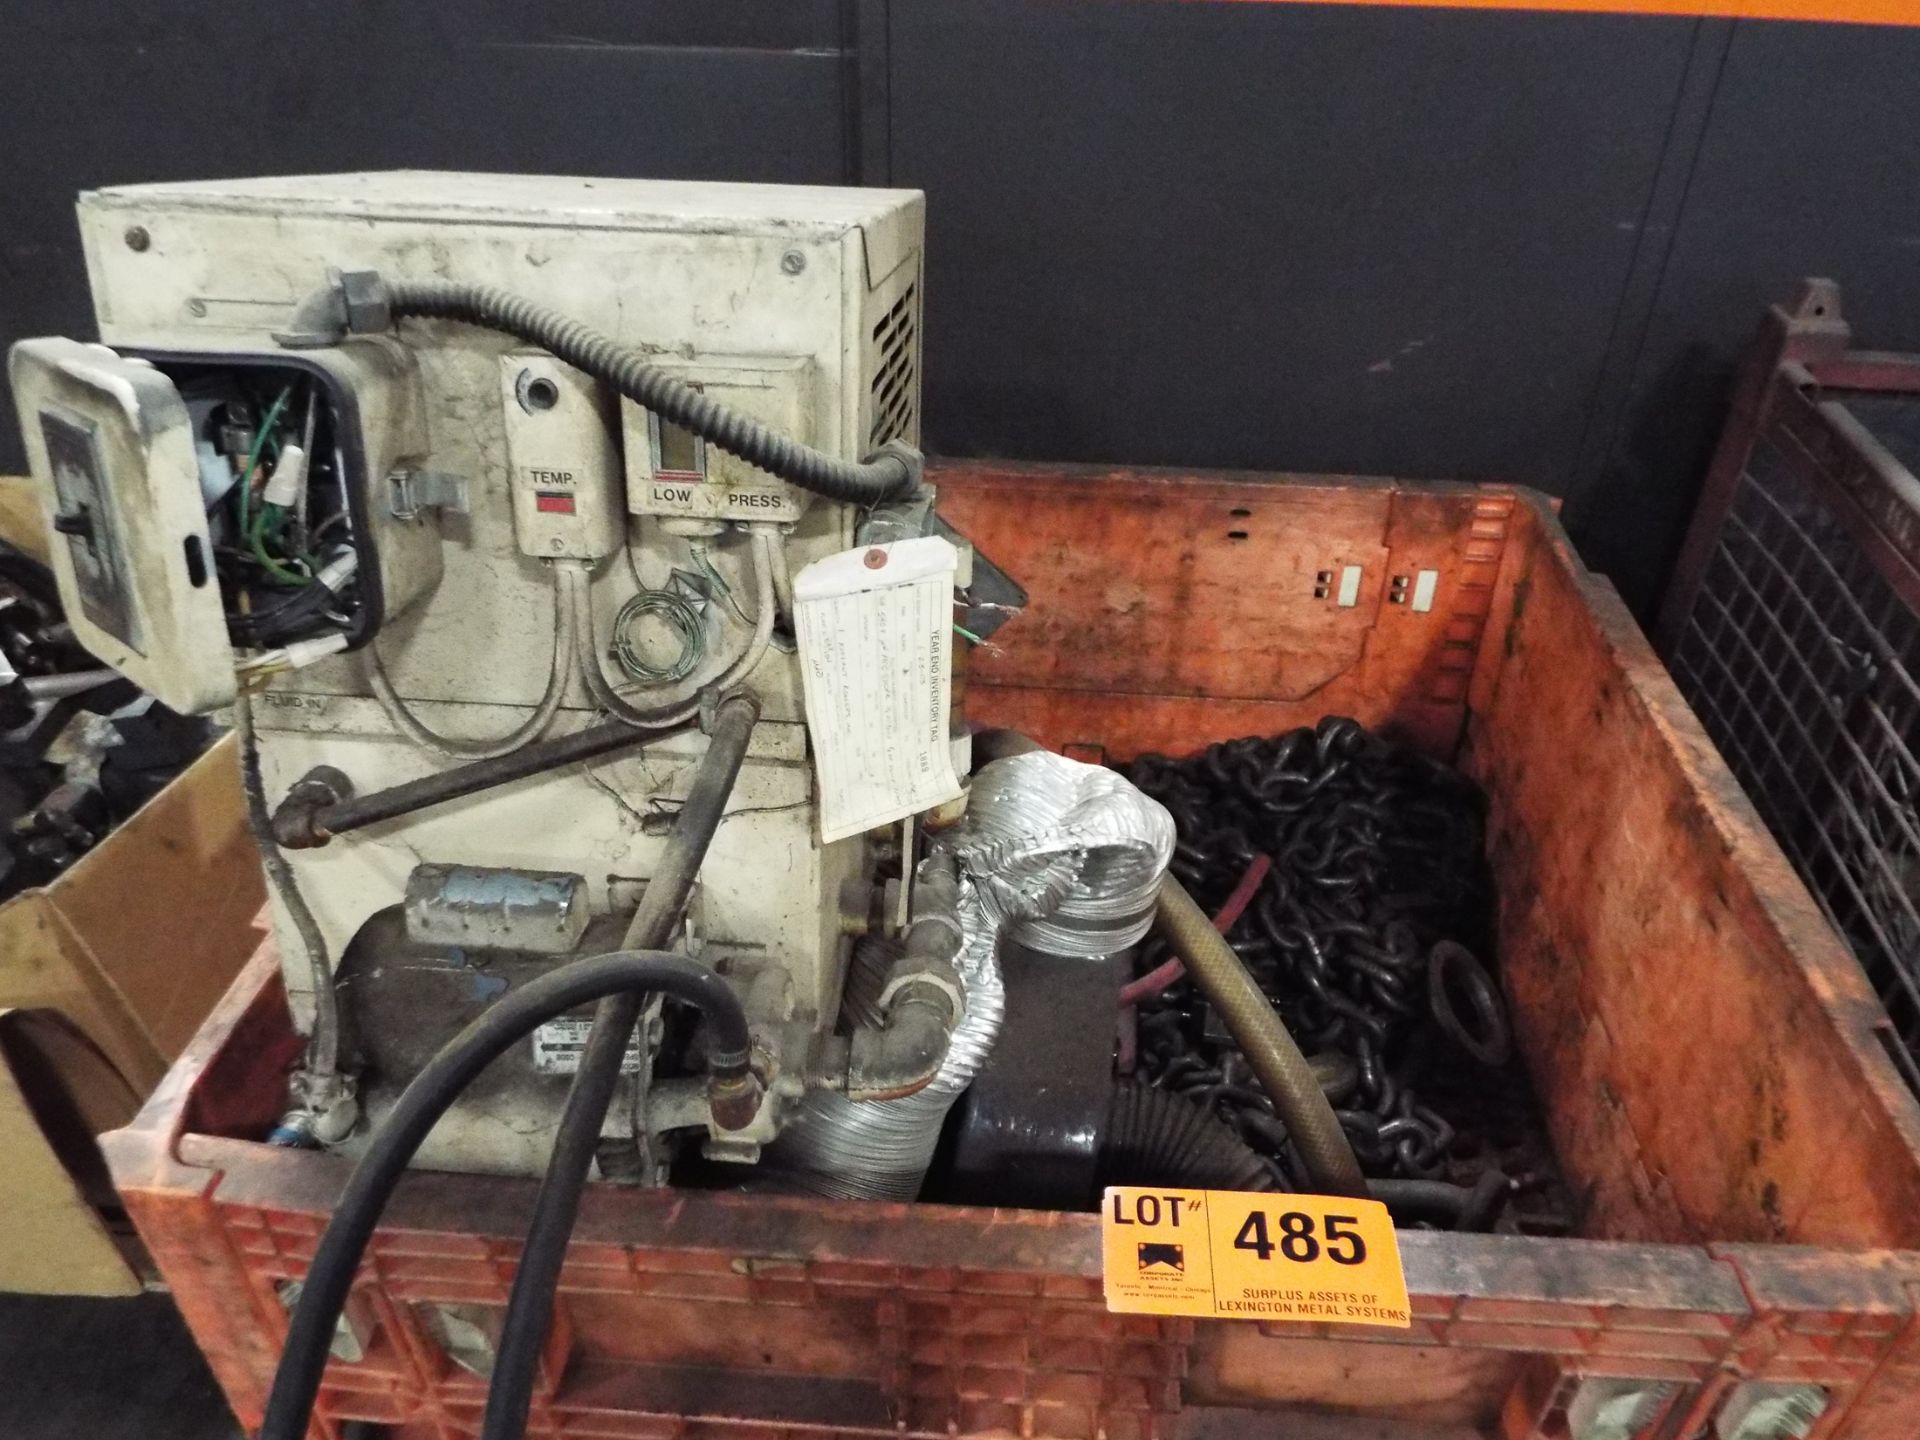 LOT/ BIN WITH CONTENTS - KOOLANT KOOLERS WATER CHILLER, BLOWER, LIFTING CHAINS